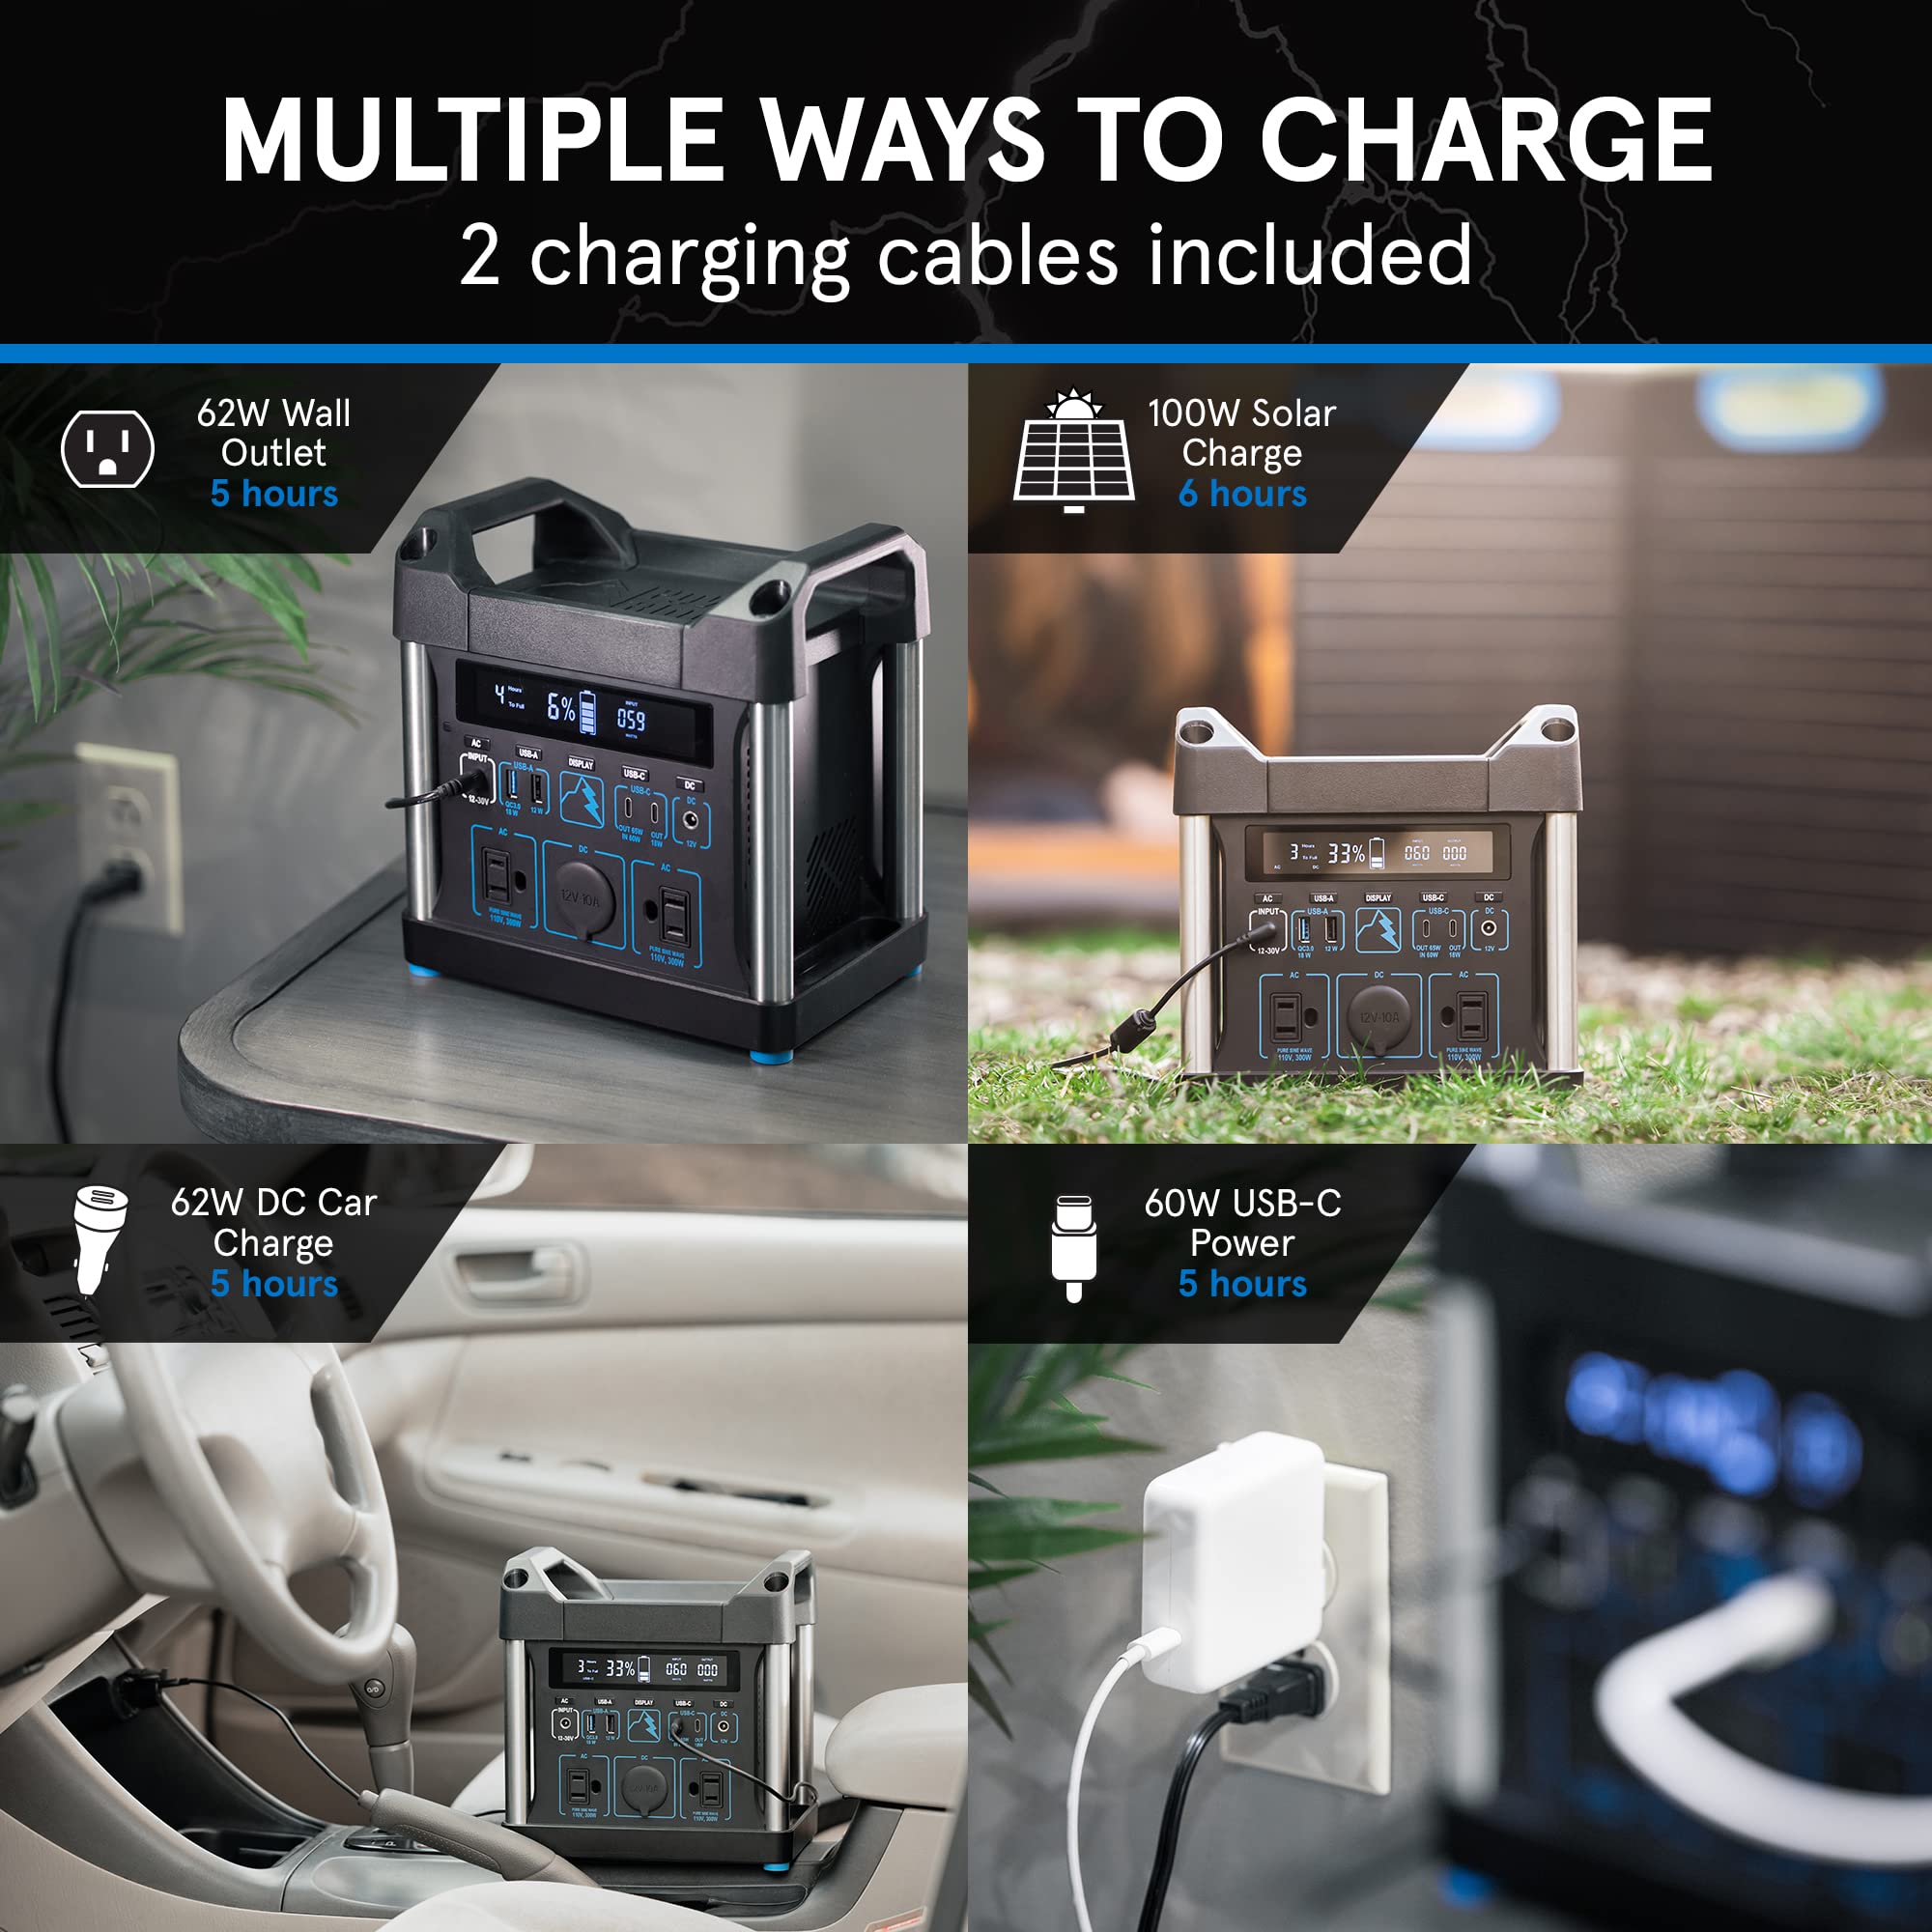 POWER RIDGE X-300 Power Station: Portable 296Wh Lithium-Ion Battery Generator with LCD Screen and Carry Handles for Charging Phones, Laptops & Other Electronics while Camping, Traveling or Road Trips